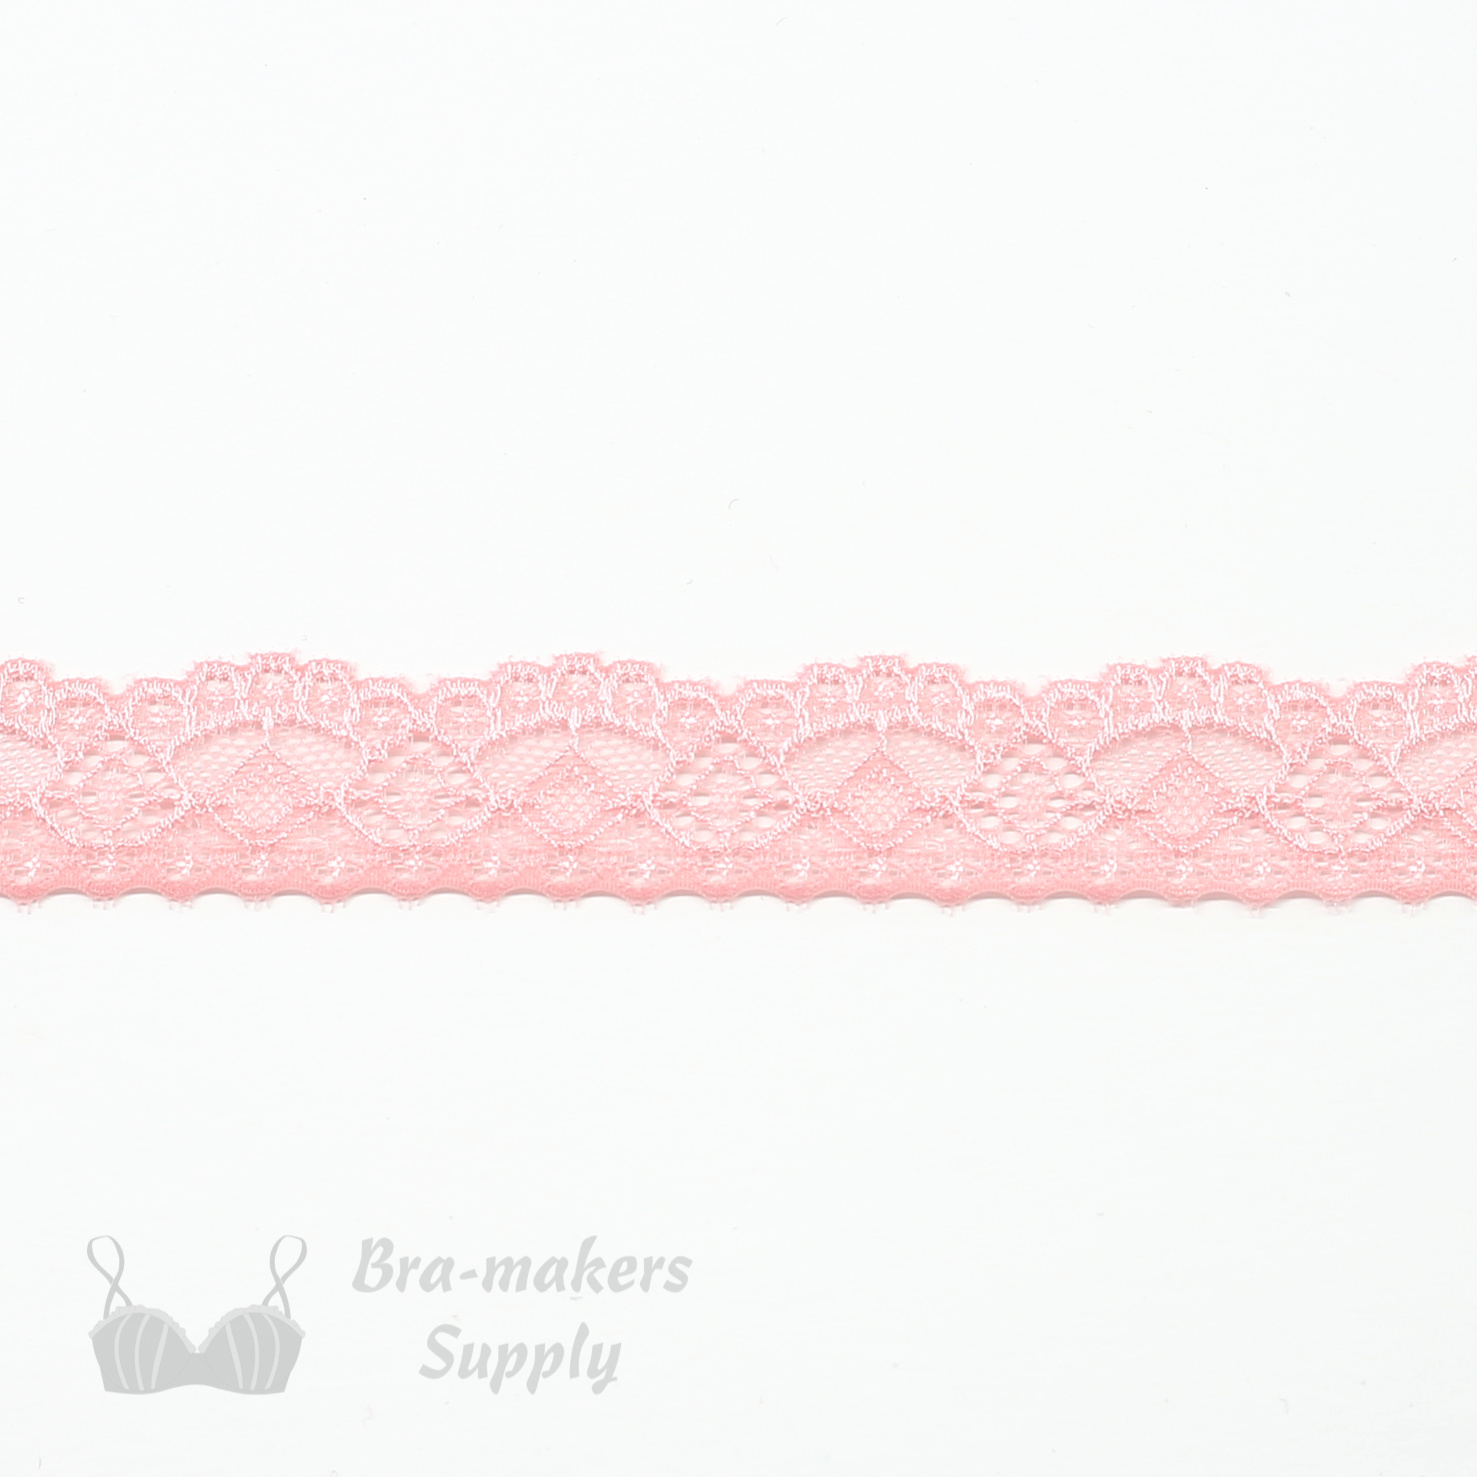 One Inch Pink Rose Stretch Scalloped Lace Trim - Bra-Makers Supply